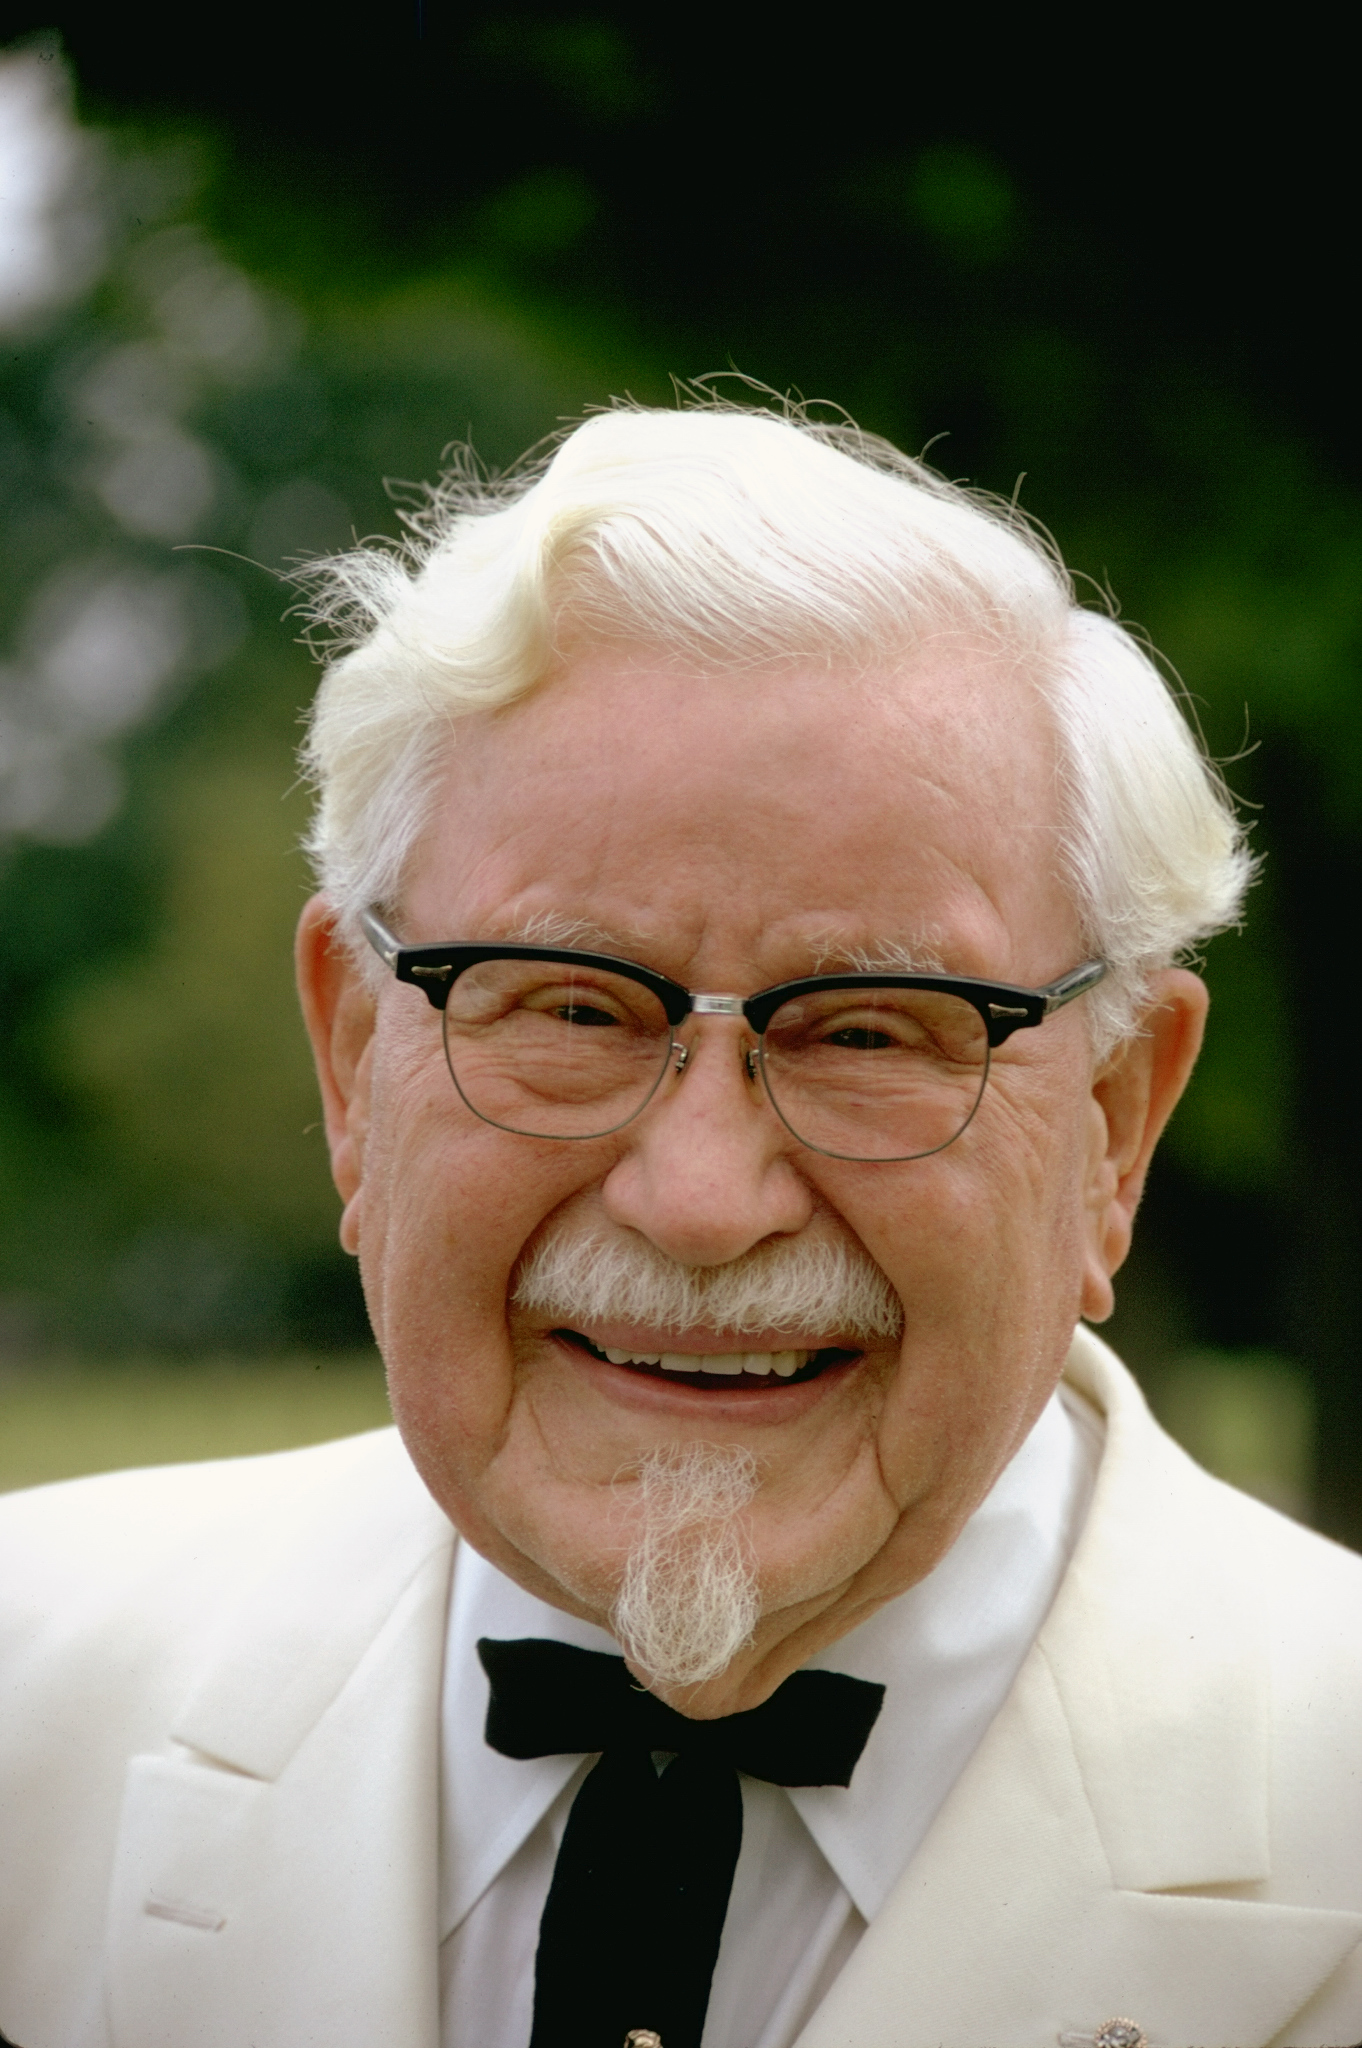 Col Harland Sanders founder of Kentucky Fried Chicken